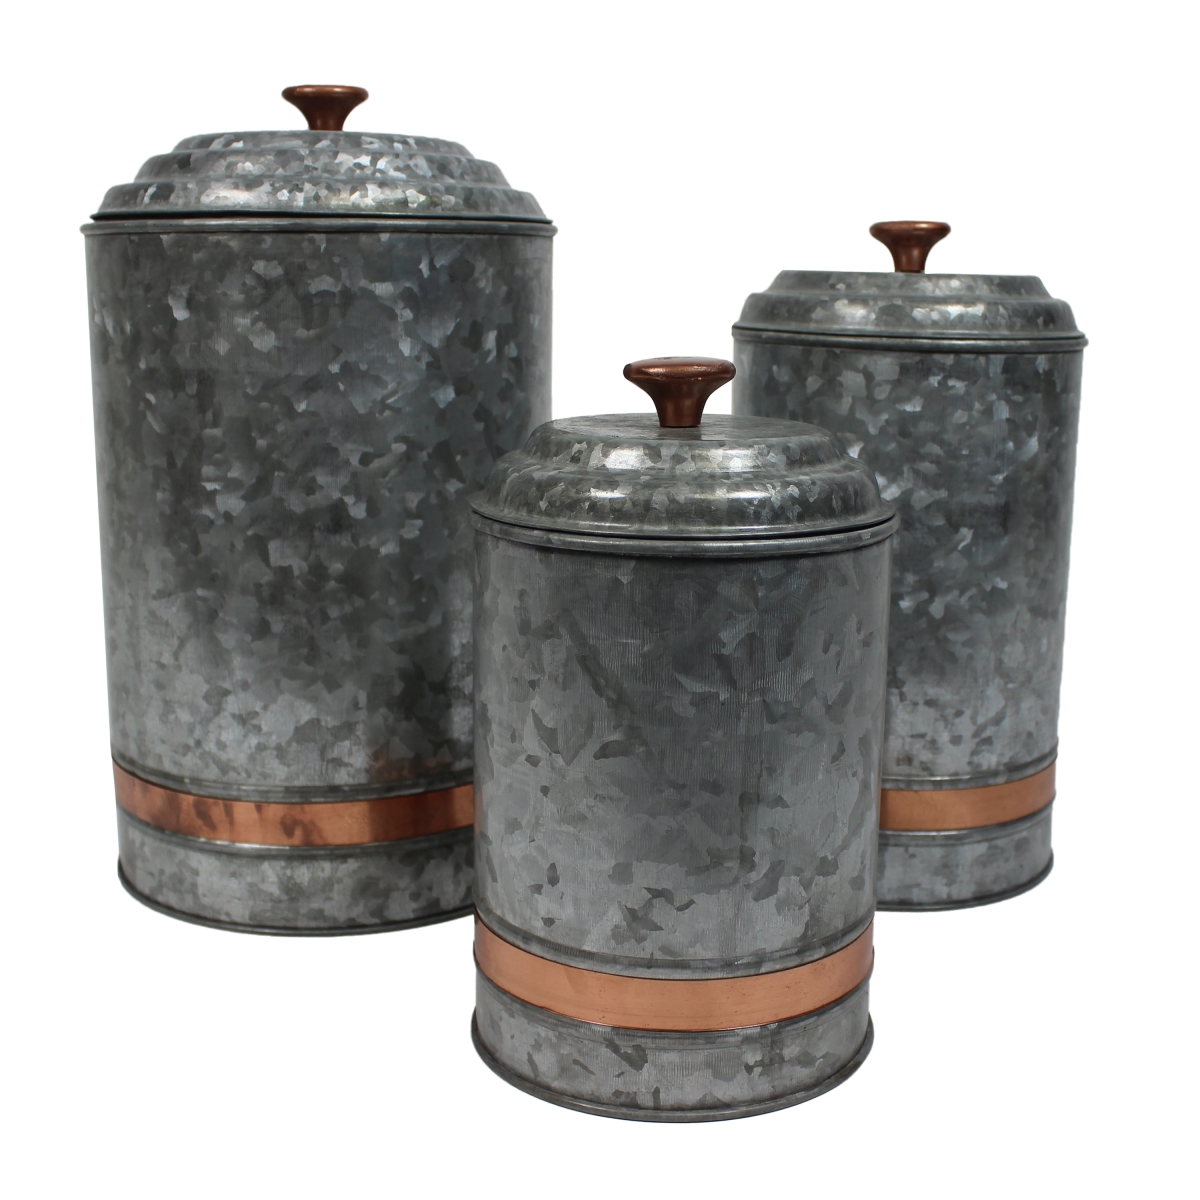 Urban Designs 8800100 Farmhouse Galvanized Steel With Copper Ring Canister Set - 3 Piece